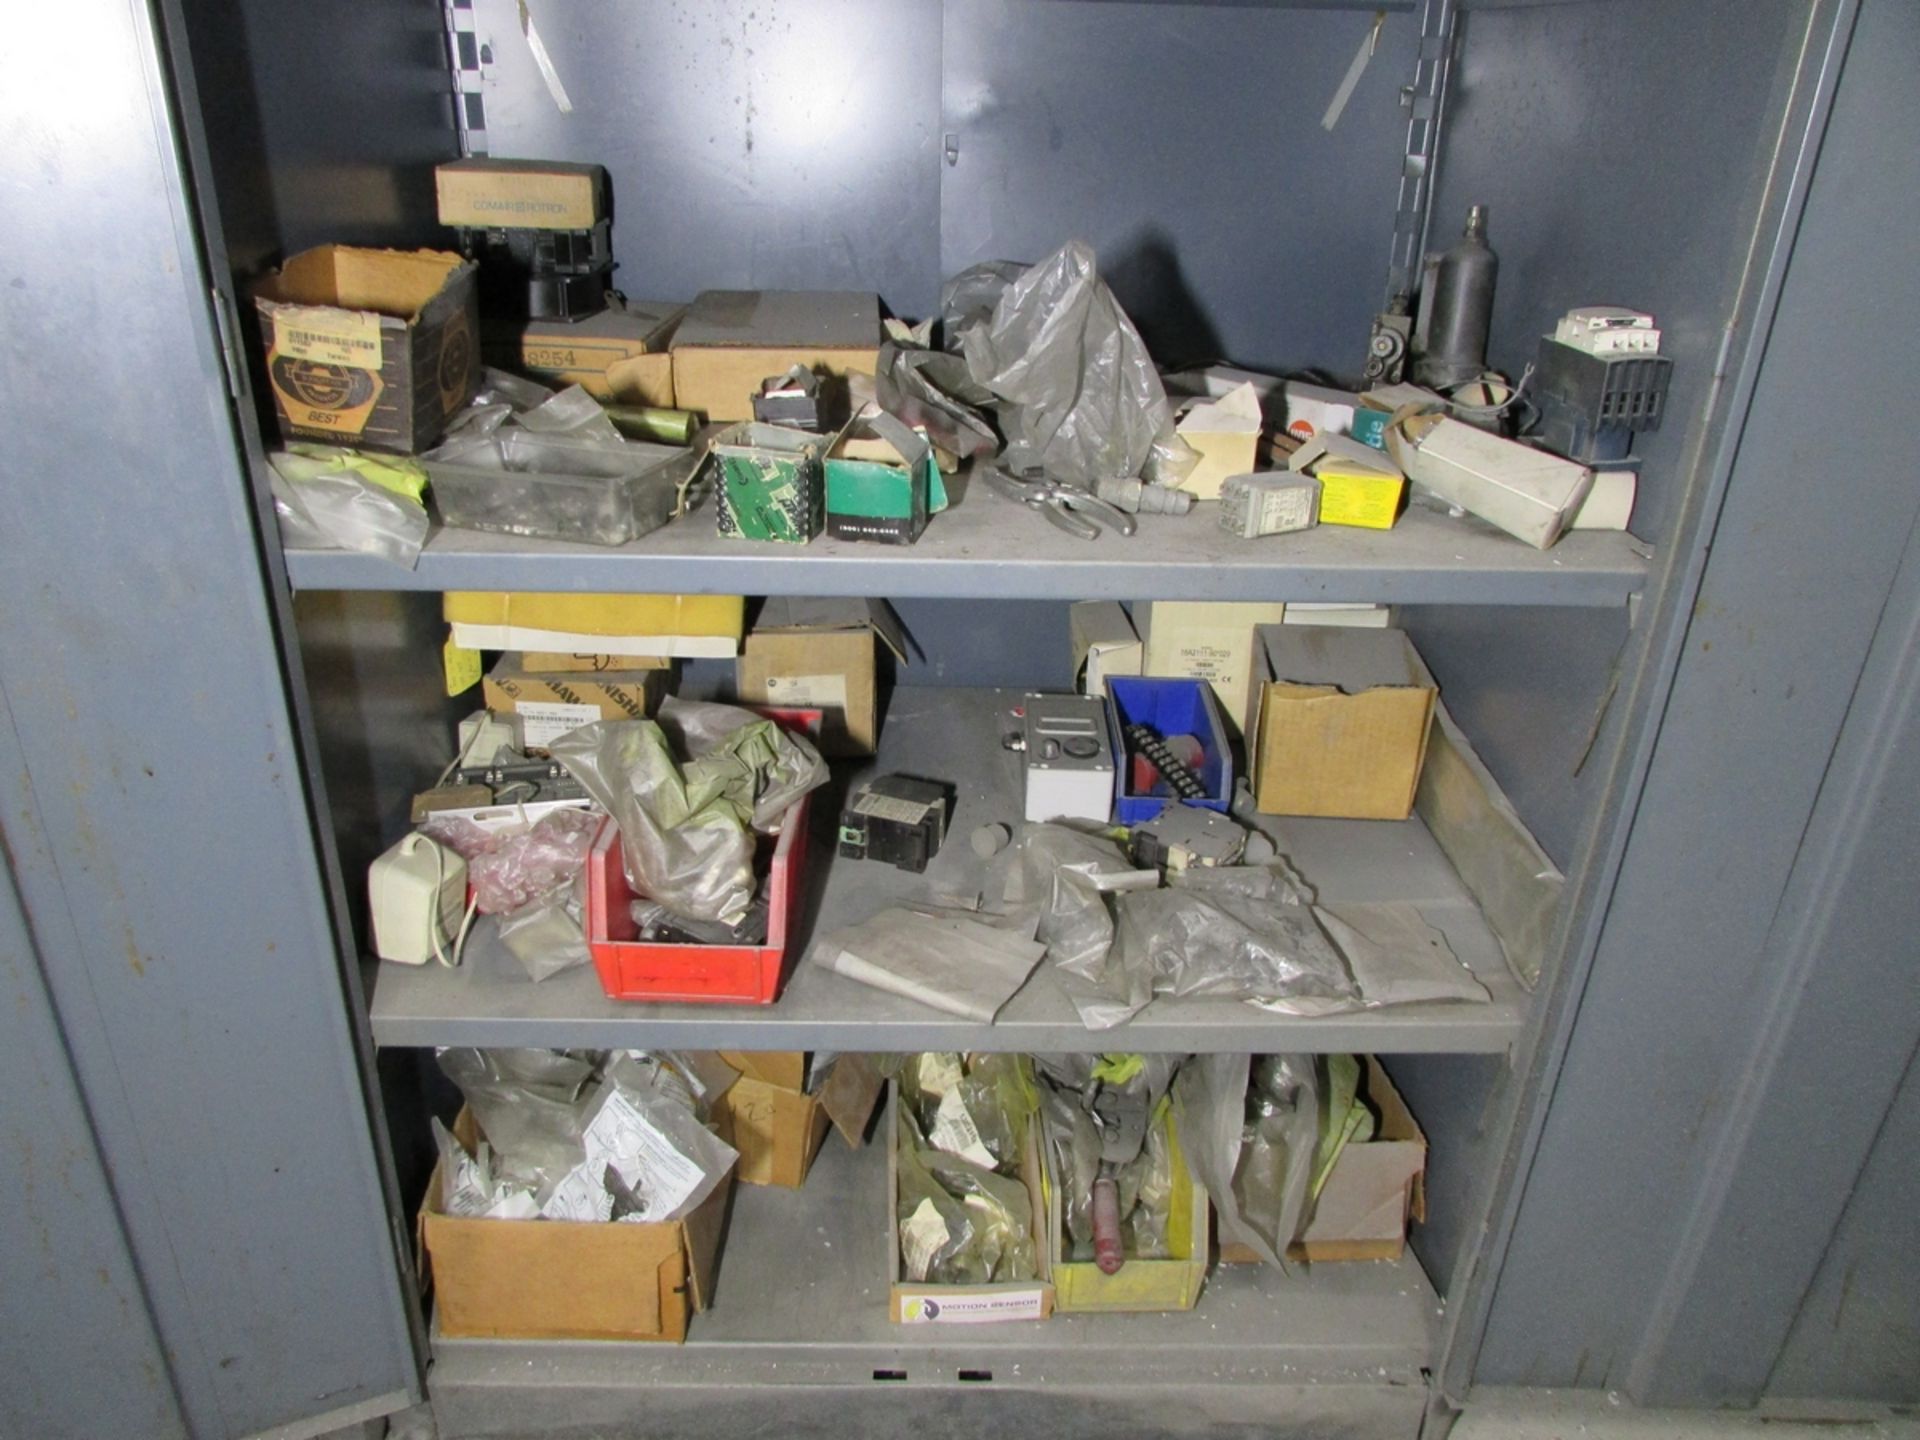 LOT - (3) 2-DOOR CABINETS, W/ CONTENTS: ASSORTED PARTS, FUSES, HARDWARE, ETC. - Image 10 of 10